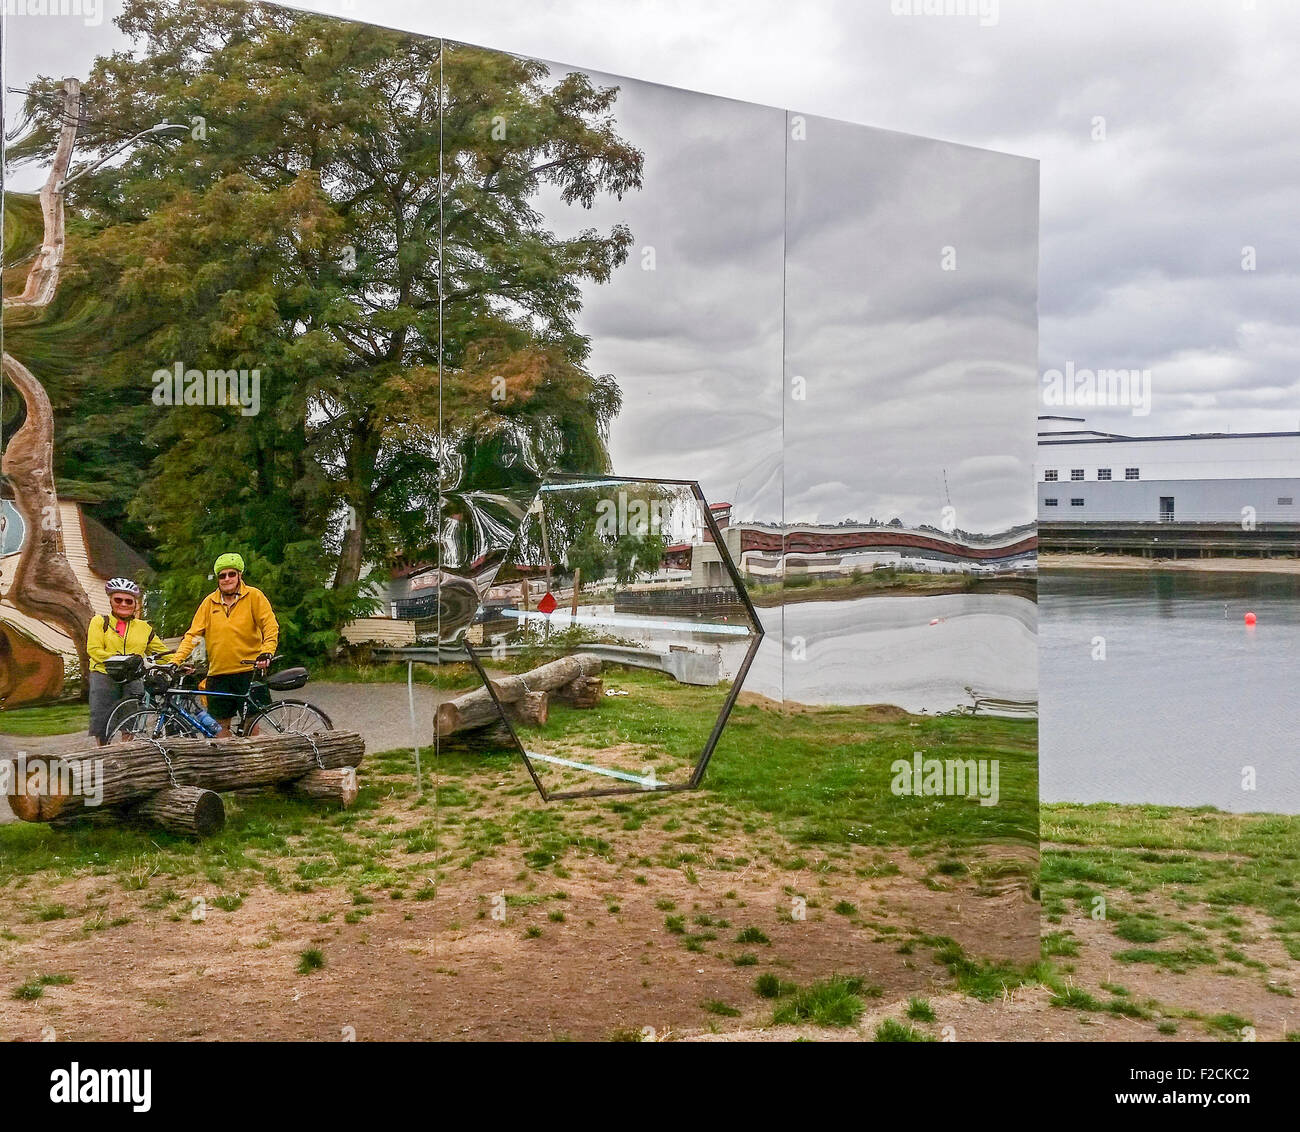 Bicyclists reflected in the mosaic of mirrors in mirror sculpture art along the Duwamish Waterway in Seattle, WA. Stock Photo